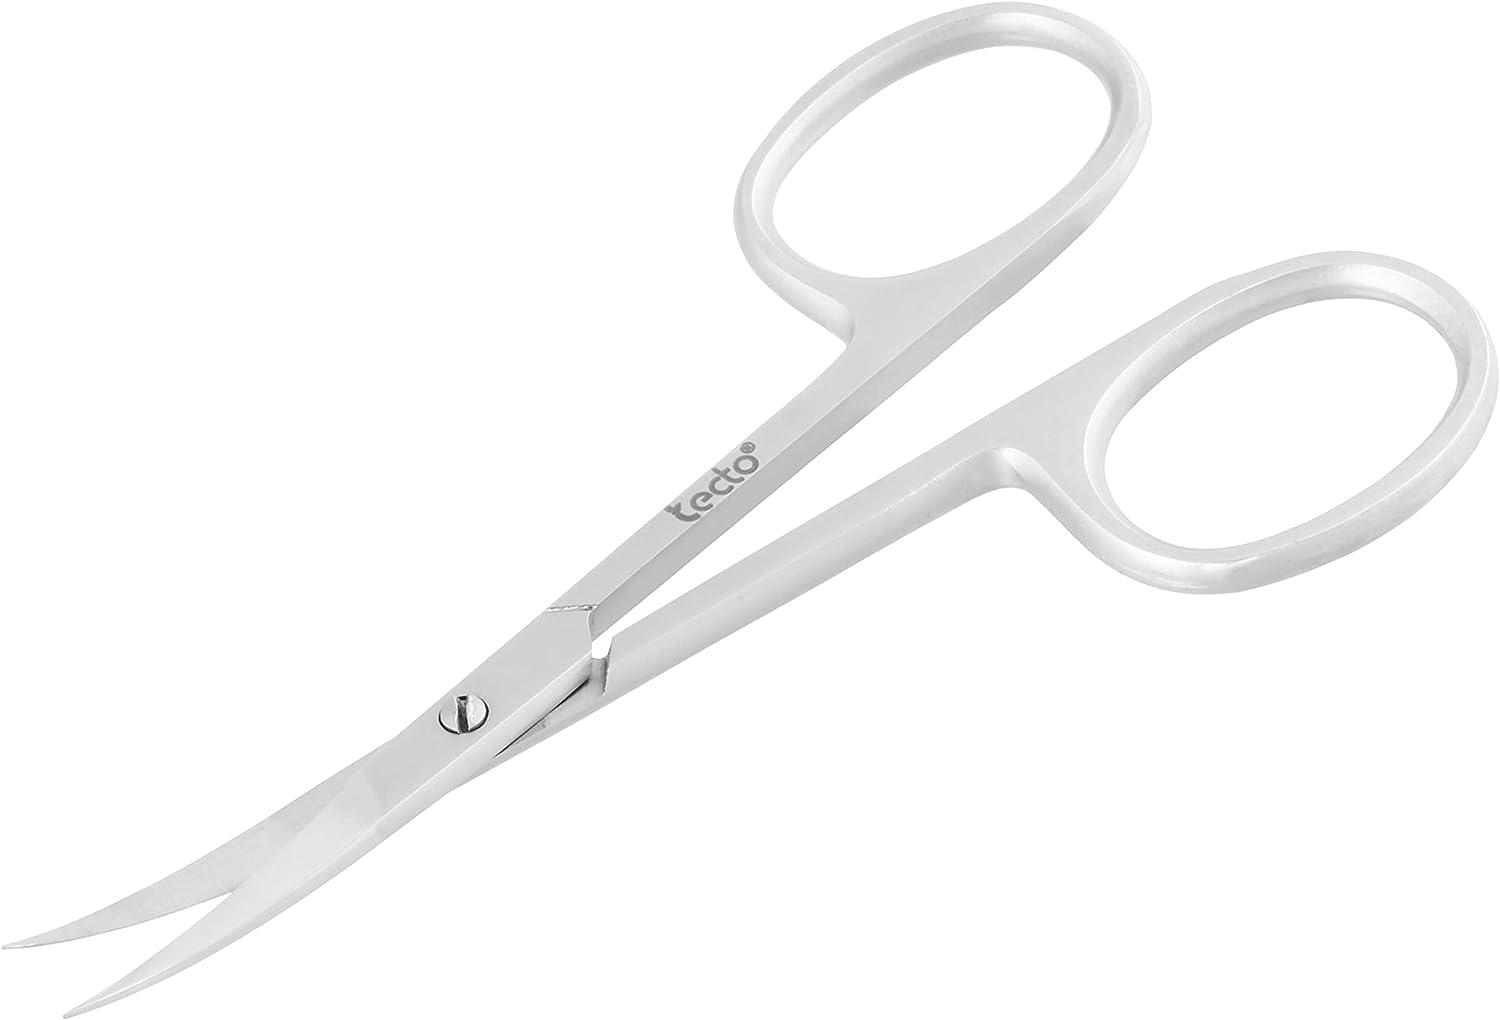 Professional Nail Scissors, Stainless Steel Manicure Scissors, Sharp  Cuticle Scissors, Multi-Purpose Curved Small Scissors Beauty for Manicure,  Eyelashes, Eyebrow, Toenail for Women and Men, Price $12. For USA.  Interested DM me for